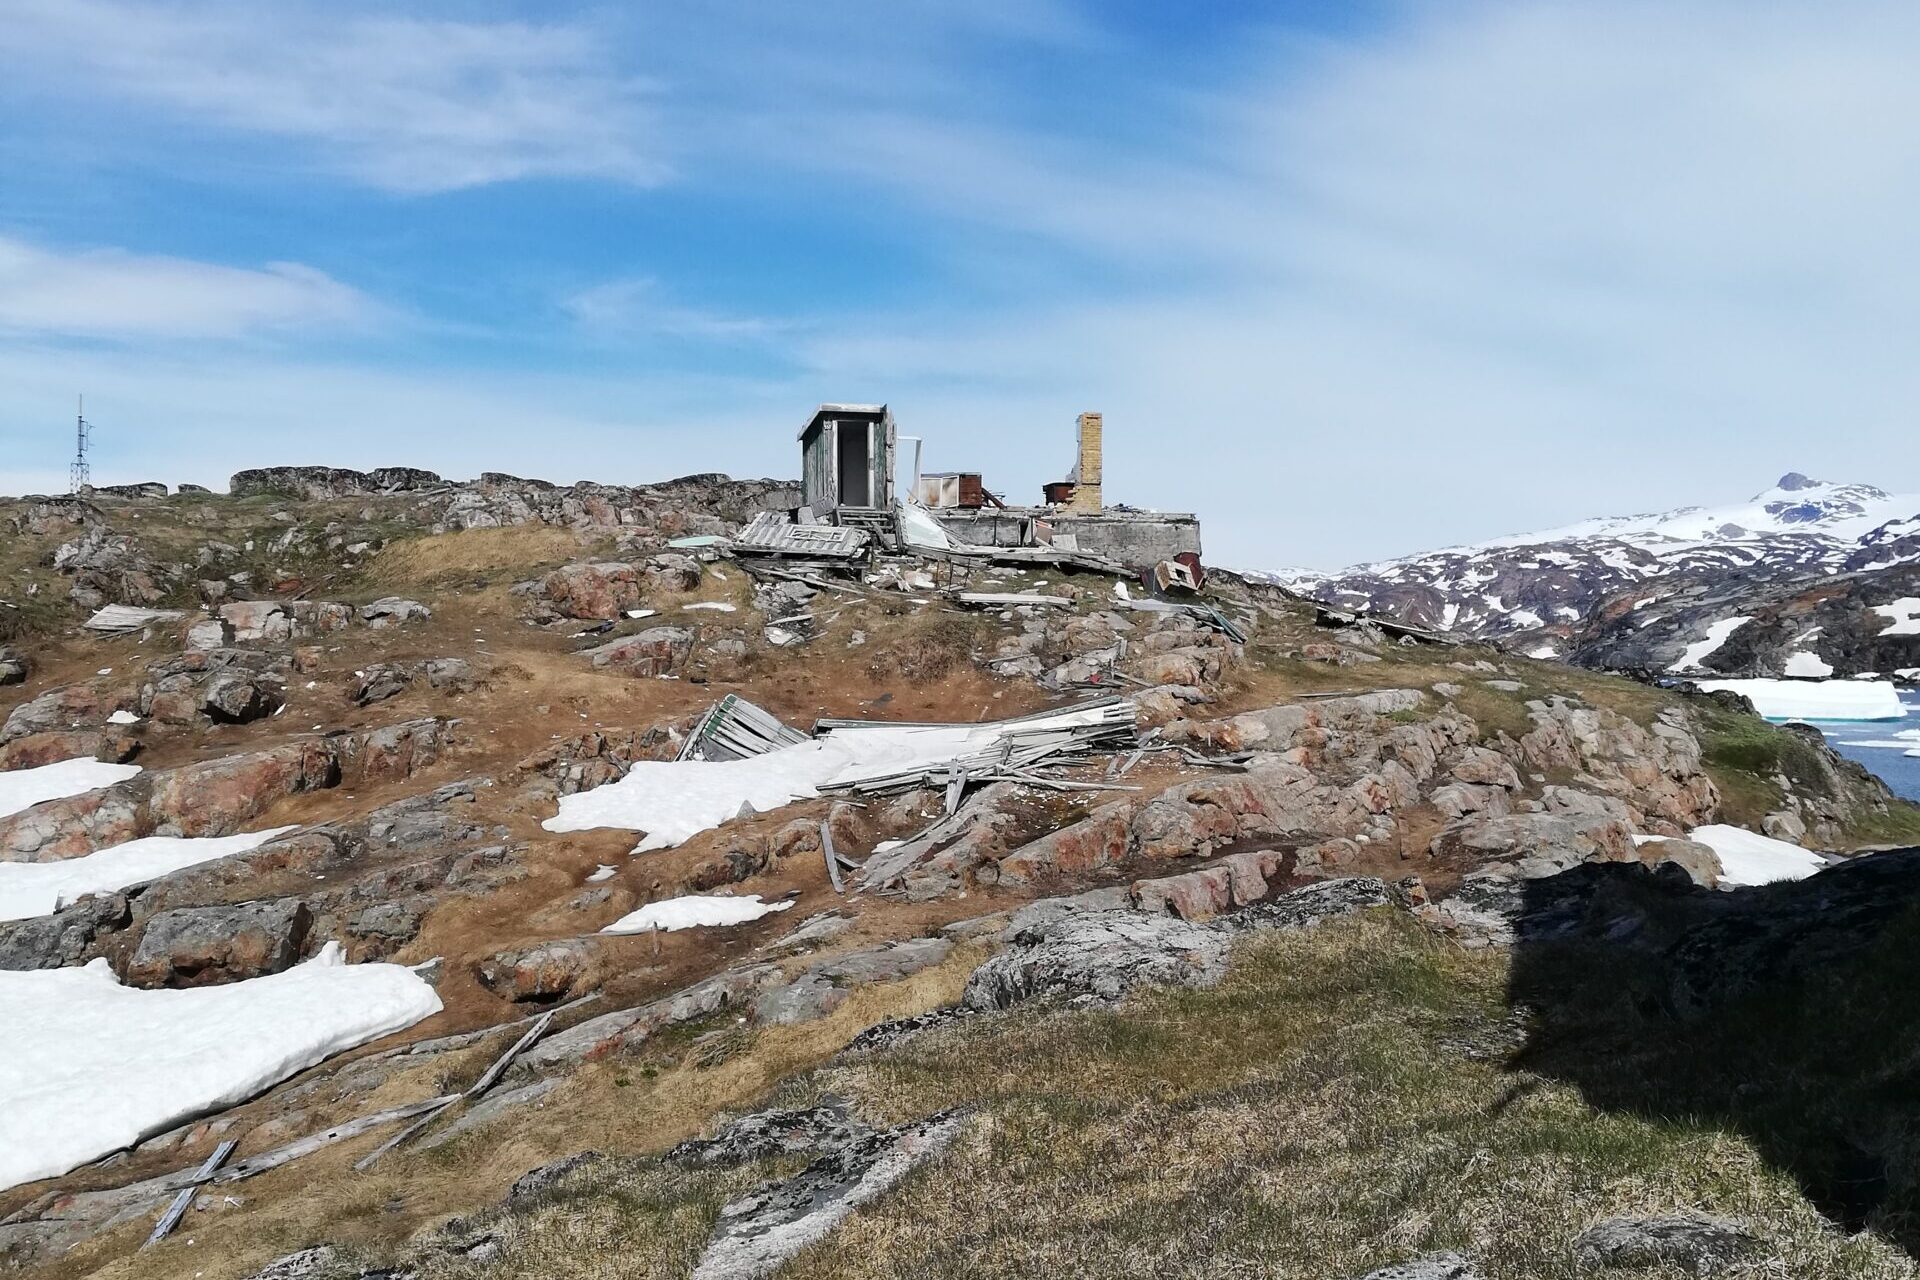 View of a house destroyed by a piteraq in the abandoned settlement Ikateq. Photo by Anna Burdenski - Visit East Greenland